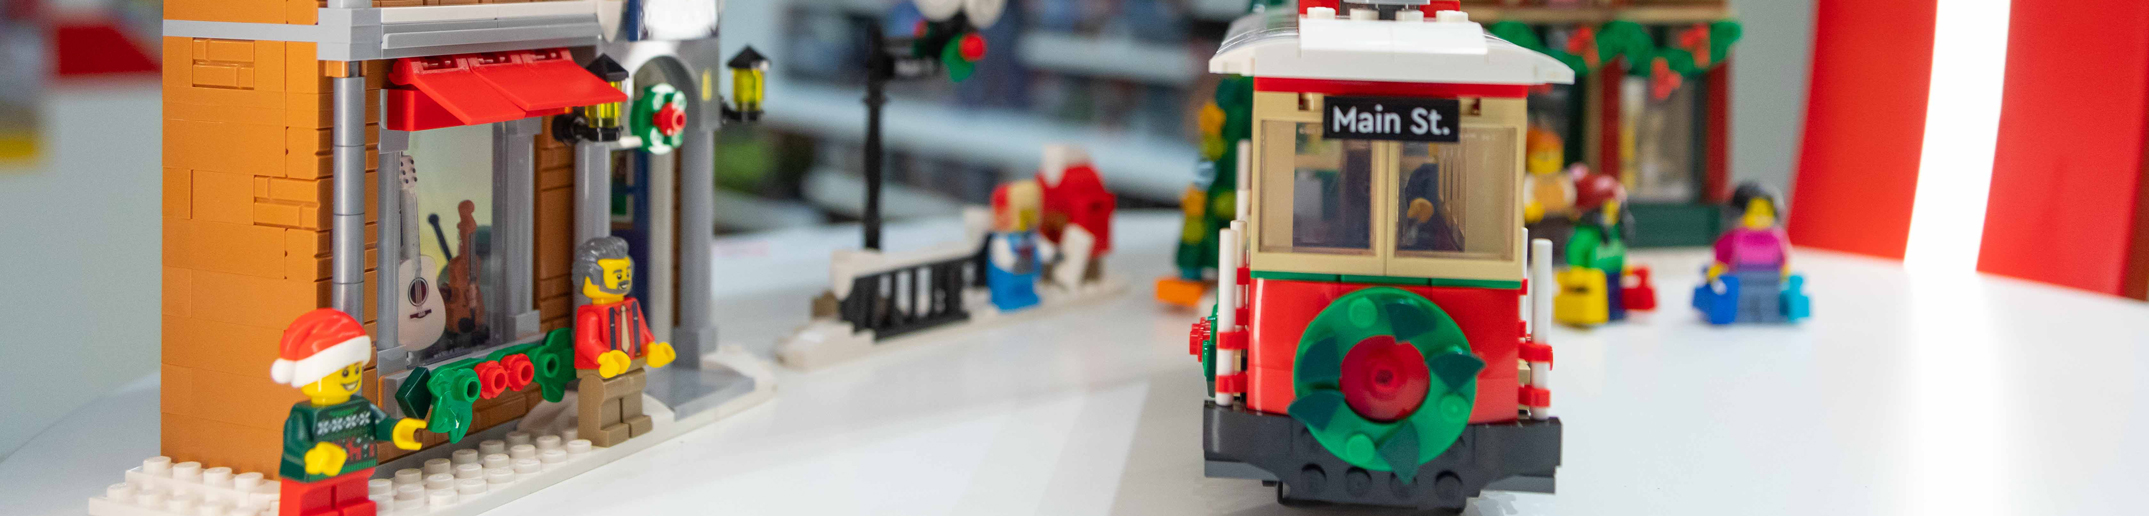 A Lego train stands on a table in a store.